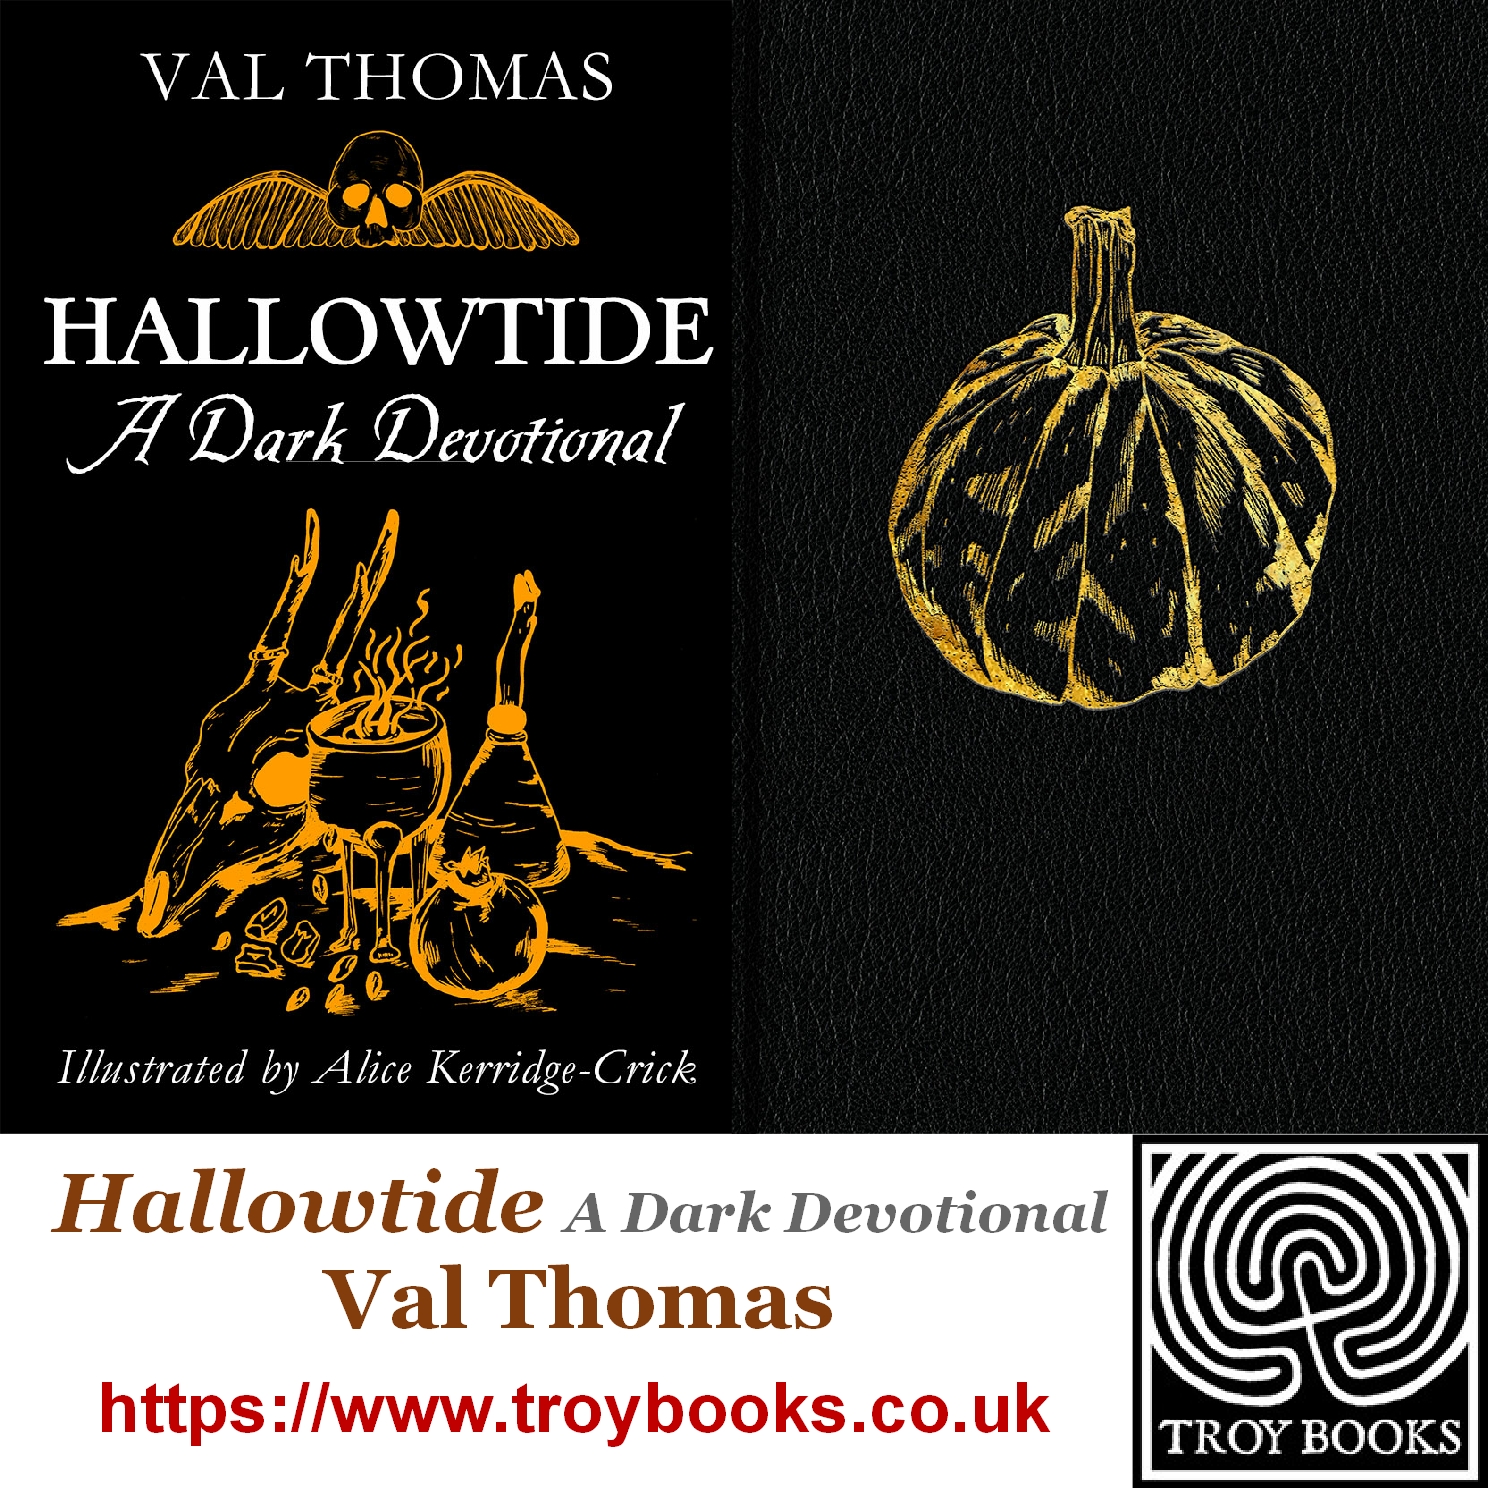 Covers of Val Thomas' new book, with a pumpkin and a seasonal altar.